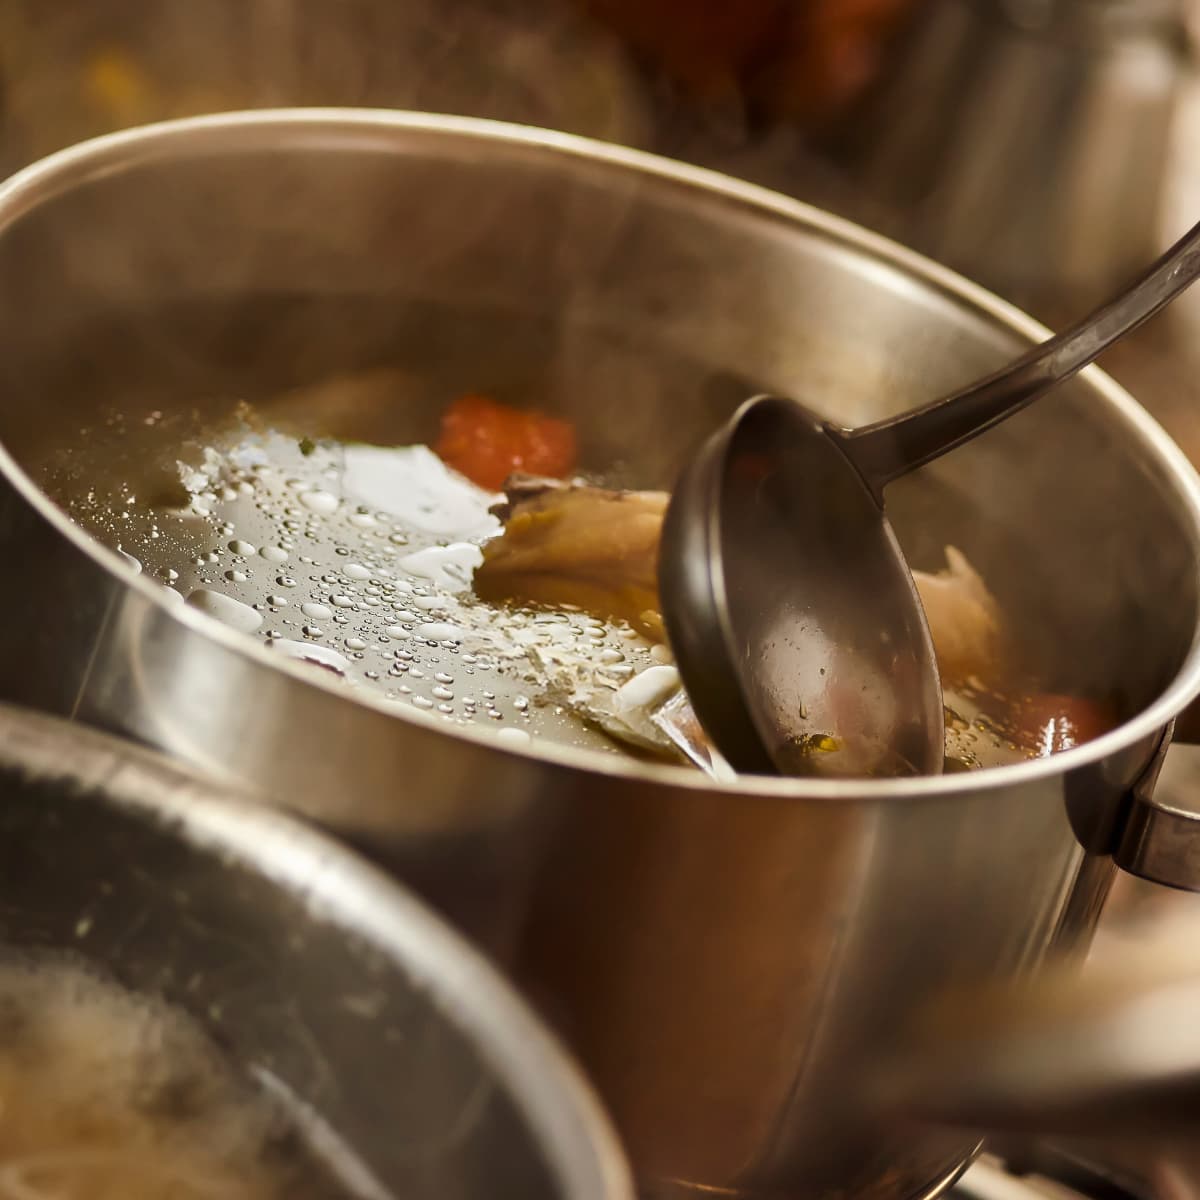 a pot simmering on the stove.